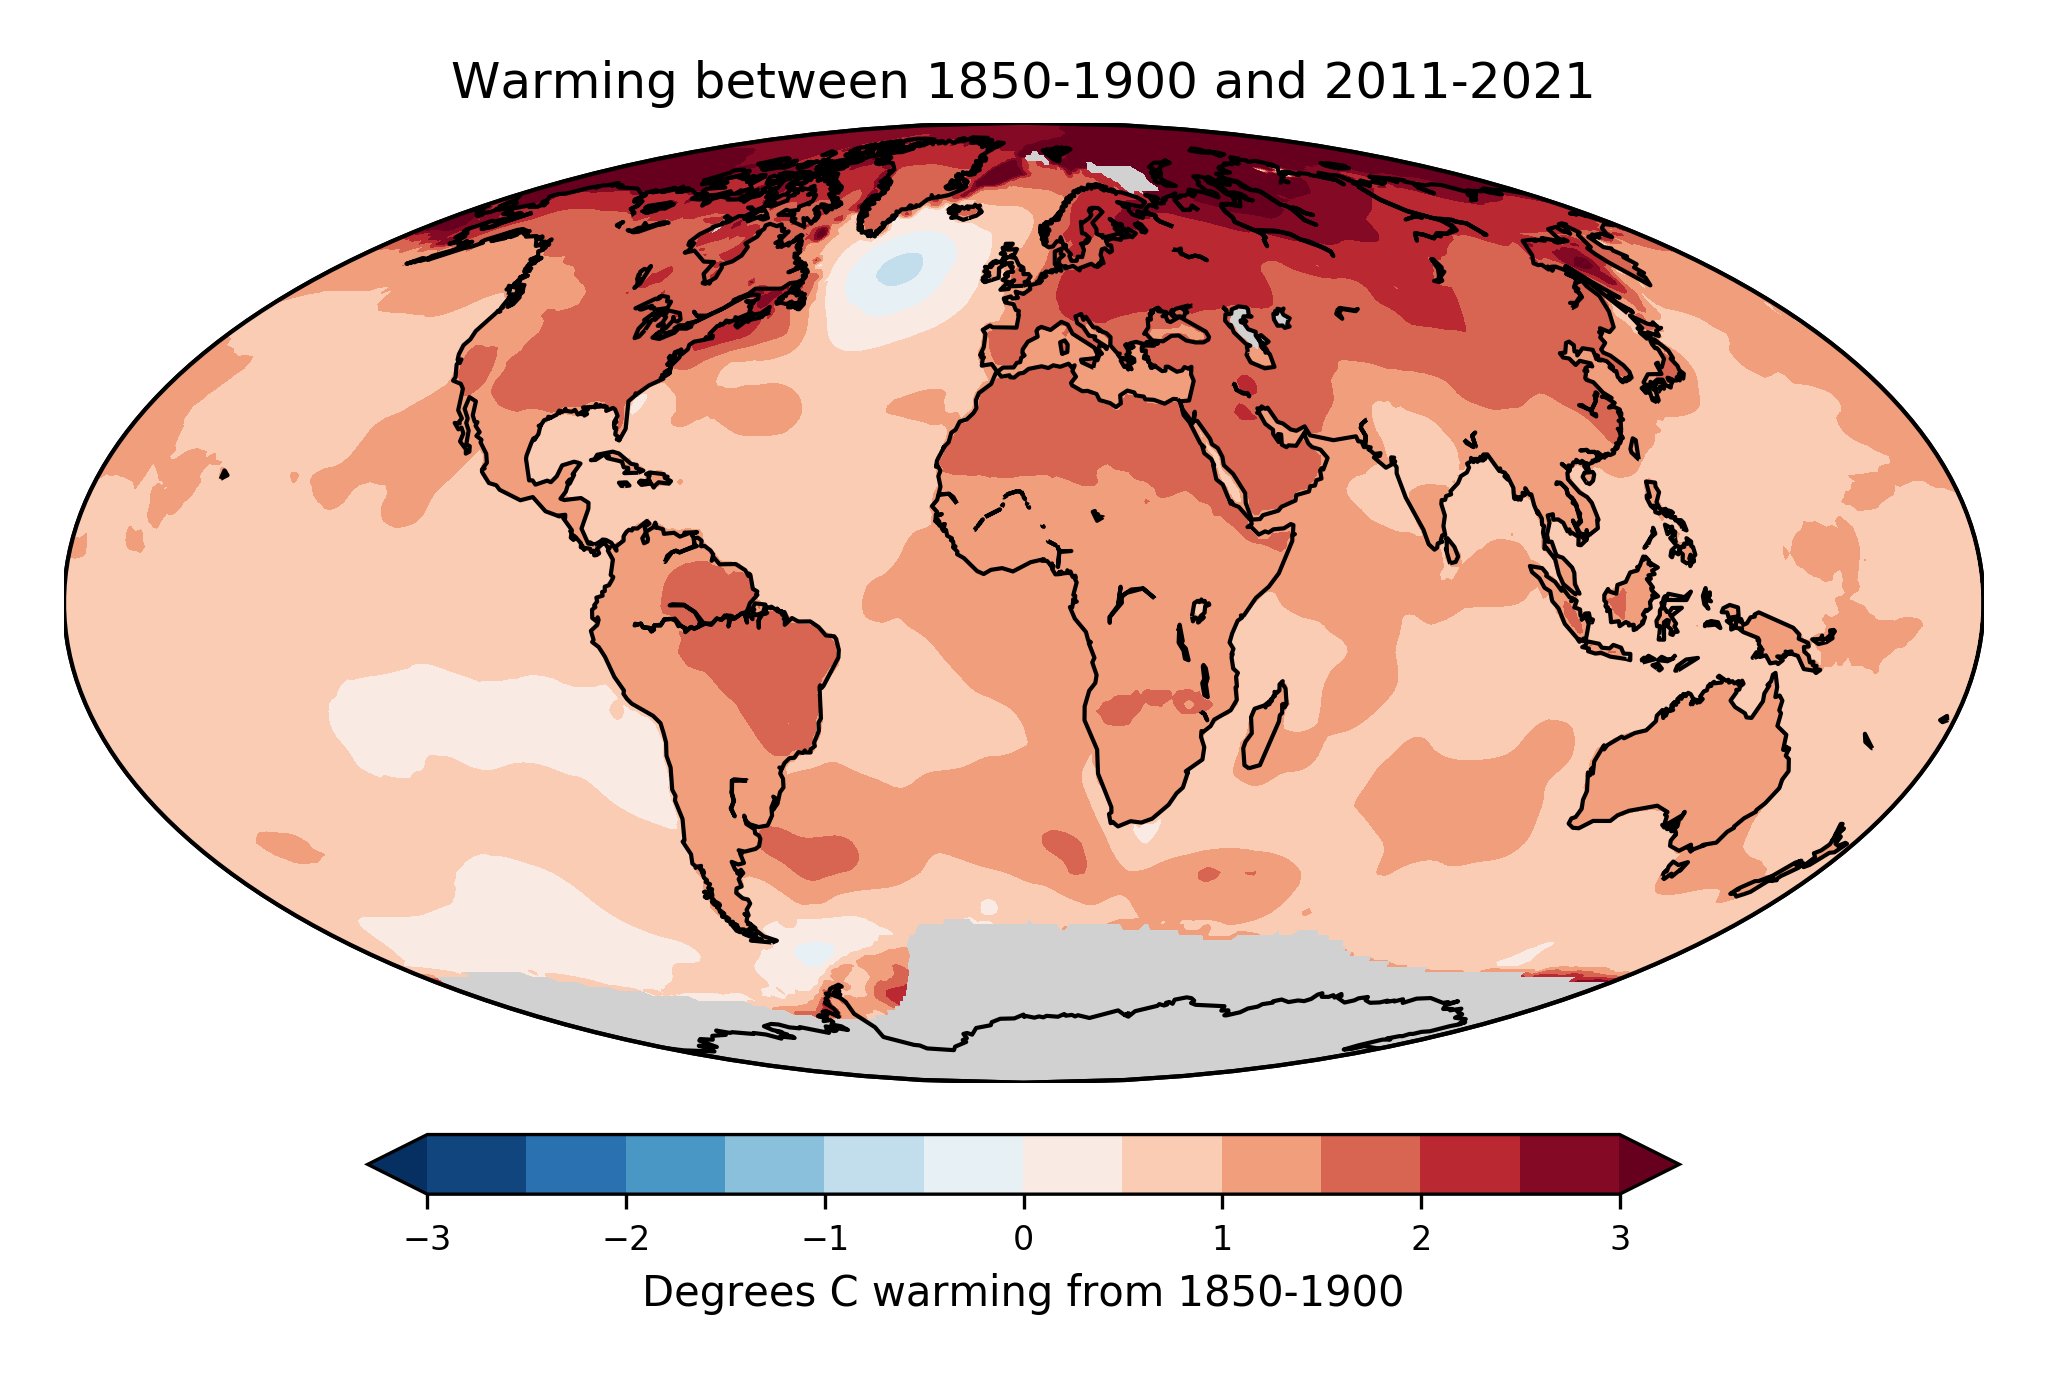 https://www.realclimate.org/images//Warming-hole-by-Hausfather.jpg